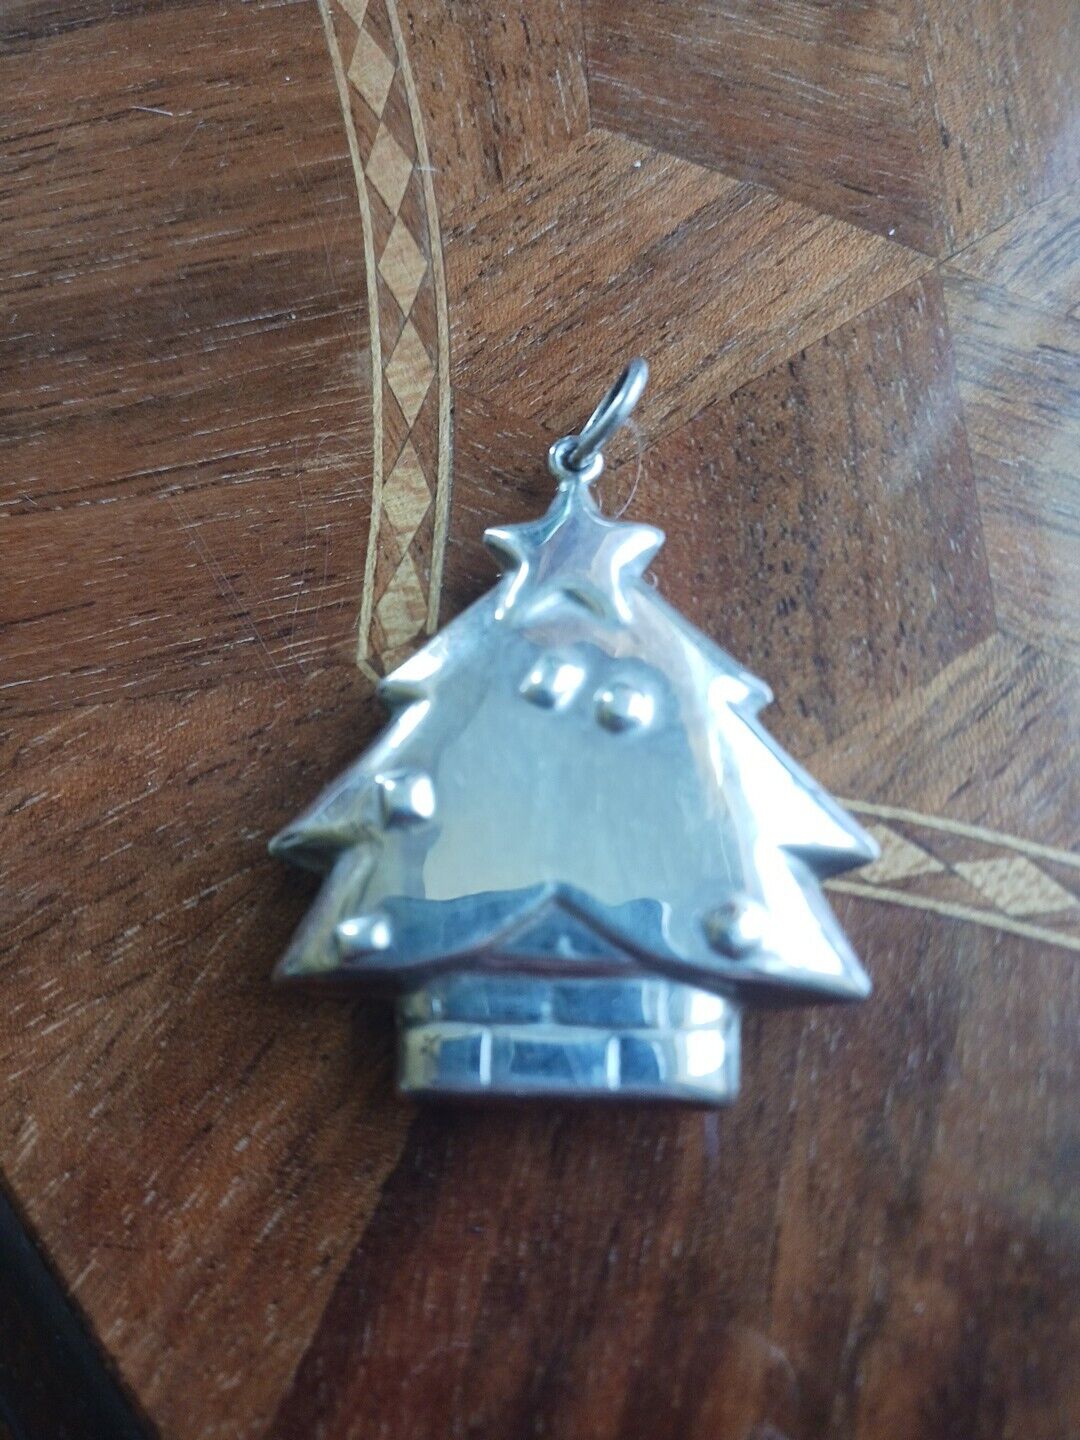 Sterling Silver Christmas Tree